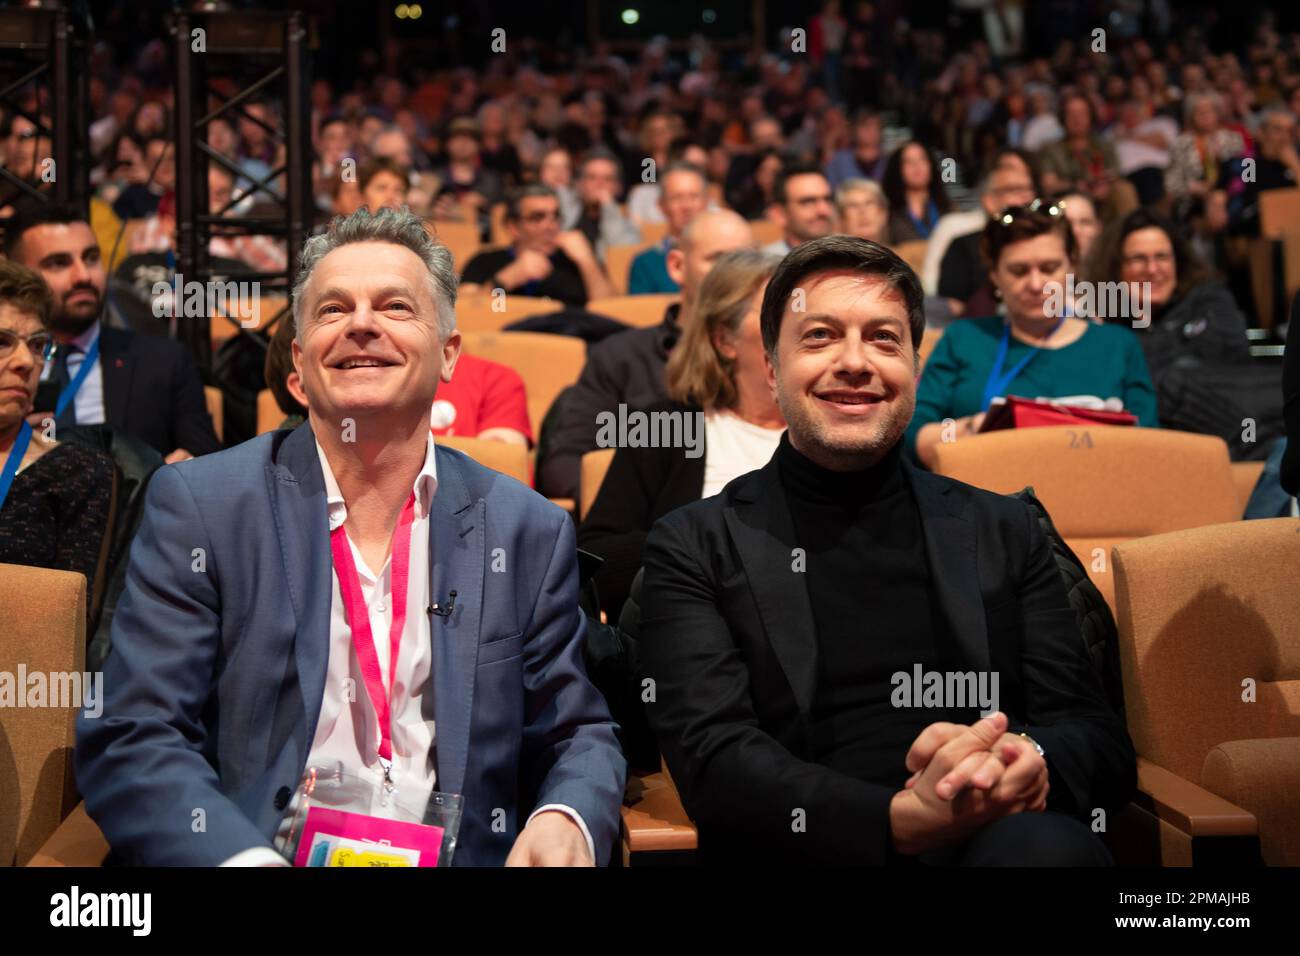 Marseille, France. 08th Apr, 2023. (from L to R): Fabien Roussel and benoit Payan are seen during the 39th Congress of the French Communist Party (PCF). The 39th Congress of the French Communist Party (PCF) takes place in Marseille from 7 to 10 April 2023. It reappoints Fabien Roussel as its leader. (Photo by Laurent Coust/SOPA Images/Sipa USA) Credit: Sipa USA/Alamy Live News Stock Photo